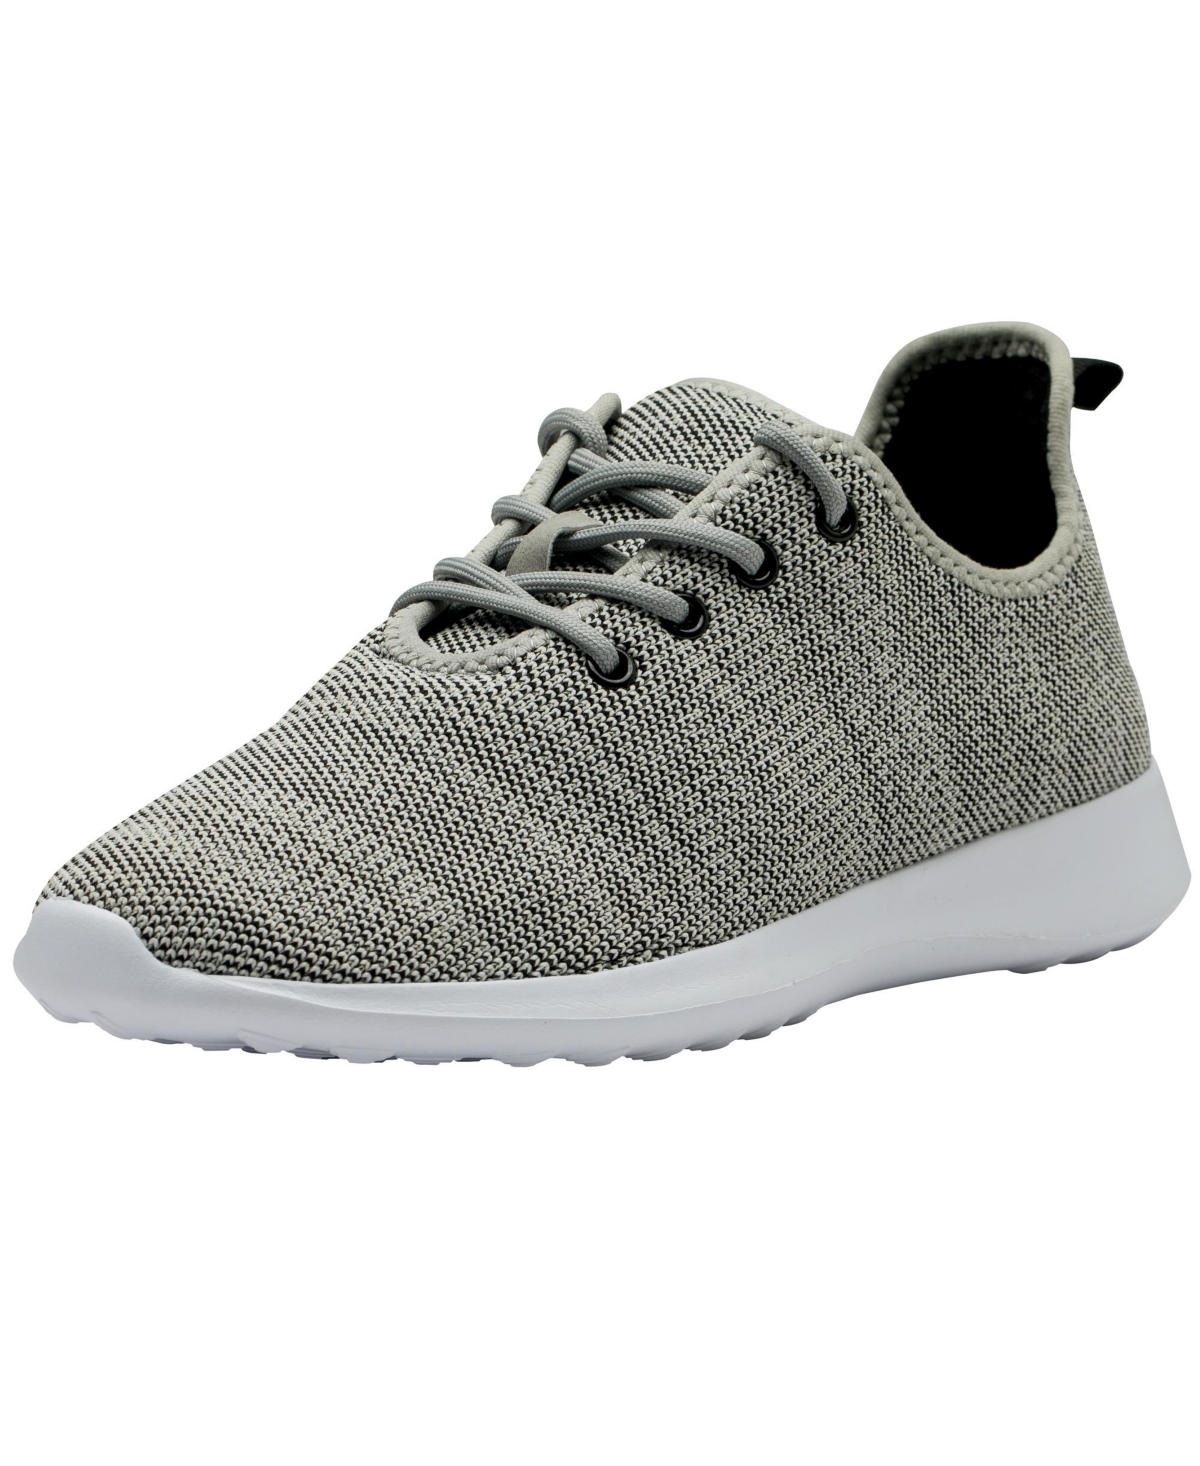 Mens Knit Fashion Sneakers Lightweight Athletic Walking Tennis Shoes - Gray